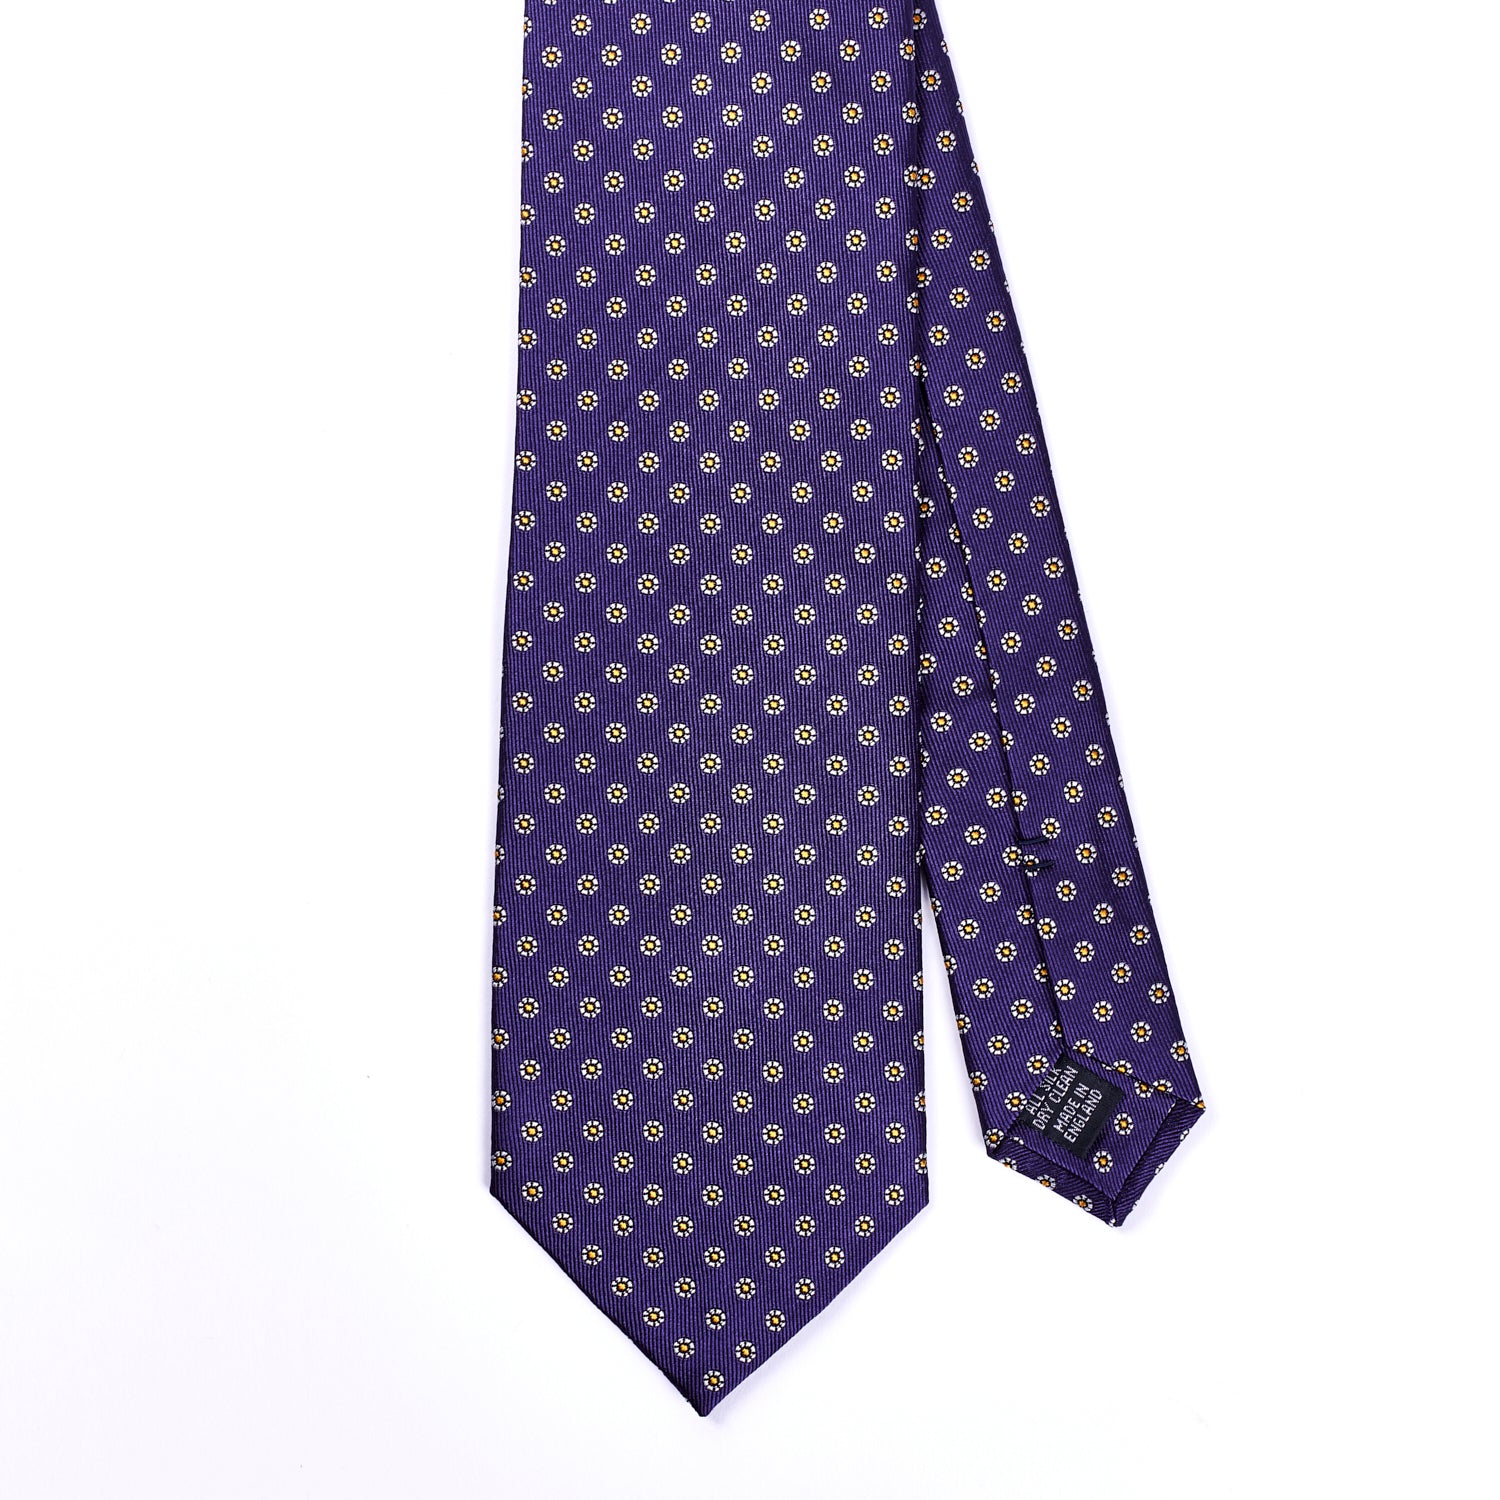 A handmade purple and gold polka dot Sovereign Grade Plum Floral Jacquard tie on a white background, inspired by KirbyAllison.com.